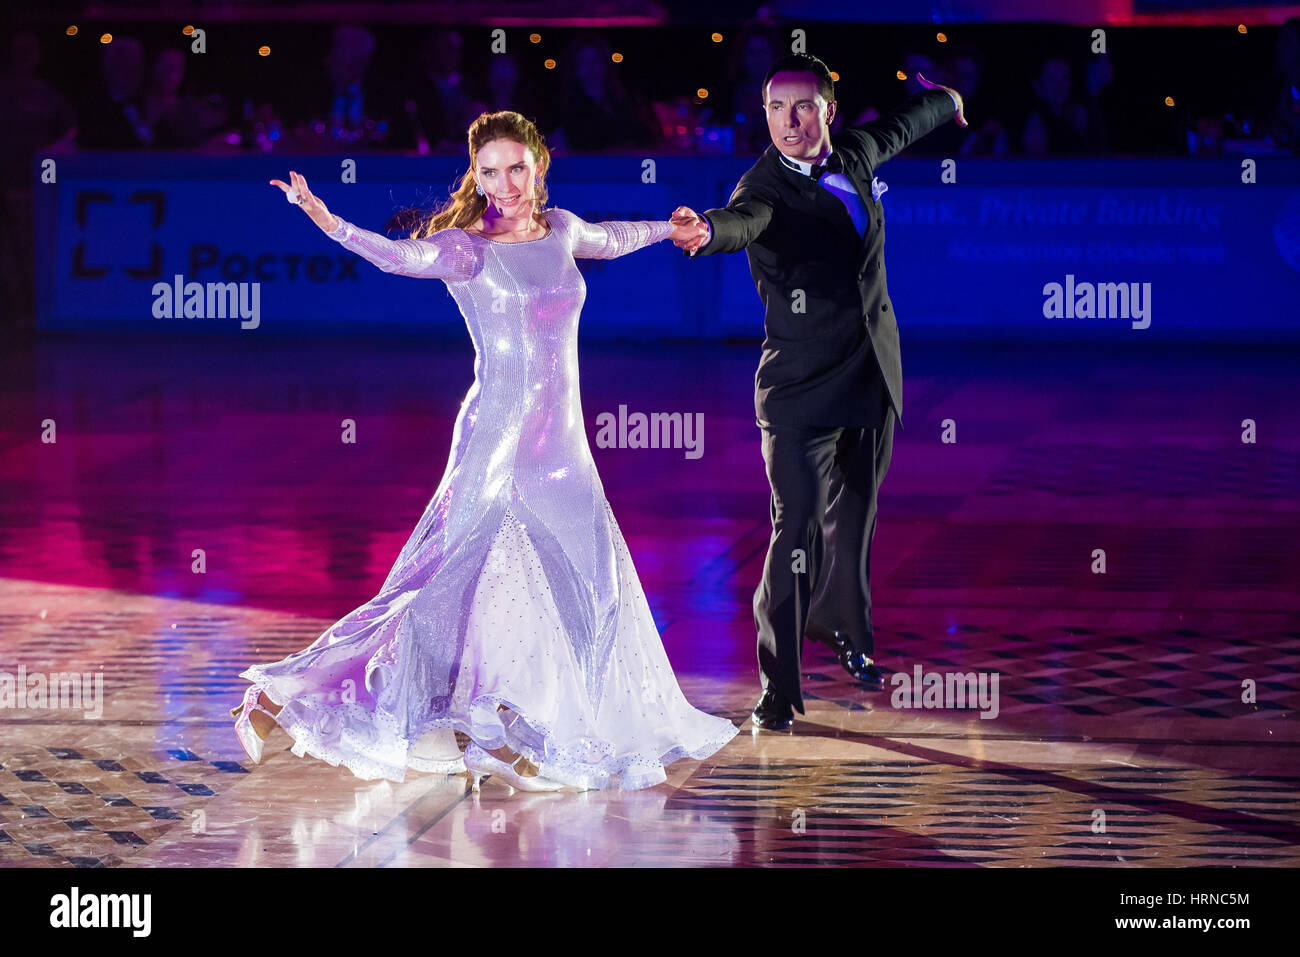 Moscow, Russia - Apr 26, 2015: Couple performs at the ballroom dance event at the 2015 Open European Professional Latin-American Championship. Stock Photo